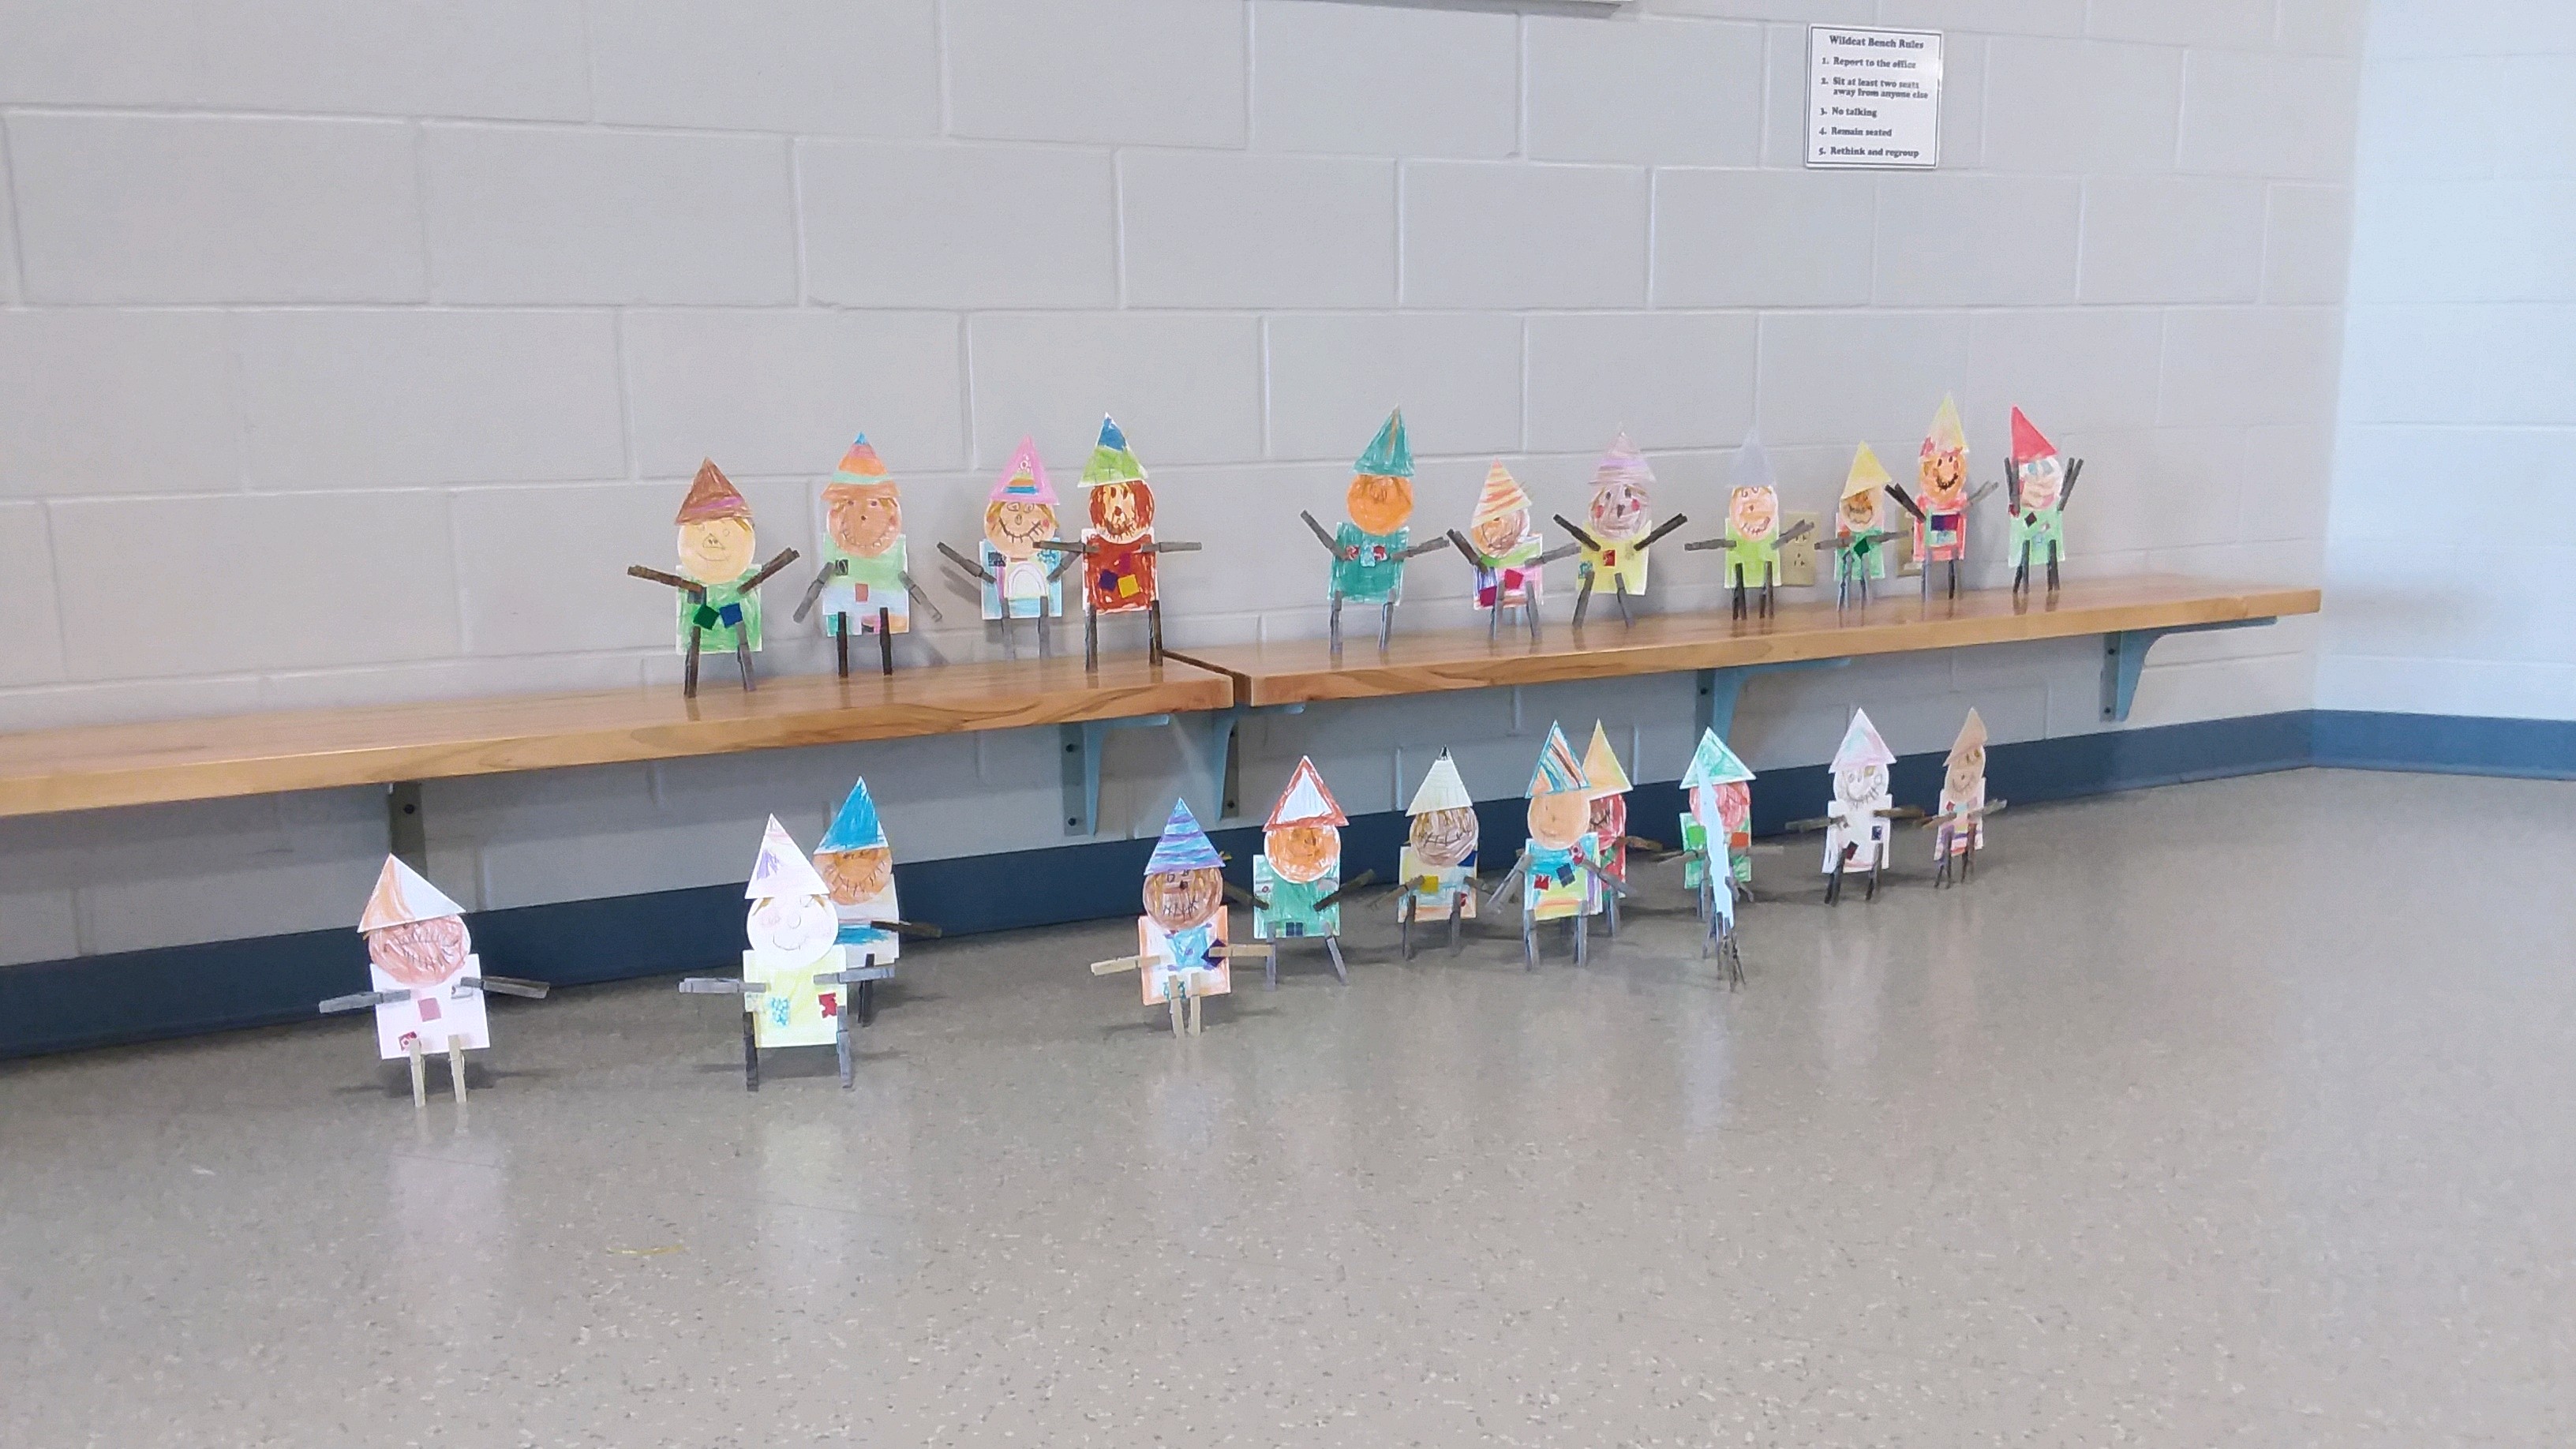 Kindergarten students got into the fall spirit by making clothespin scarecrows.